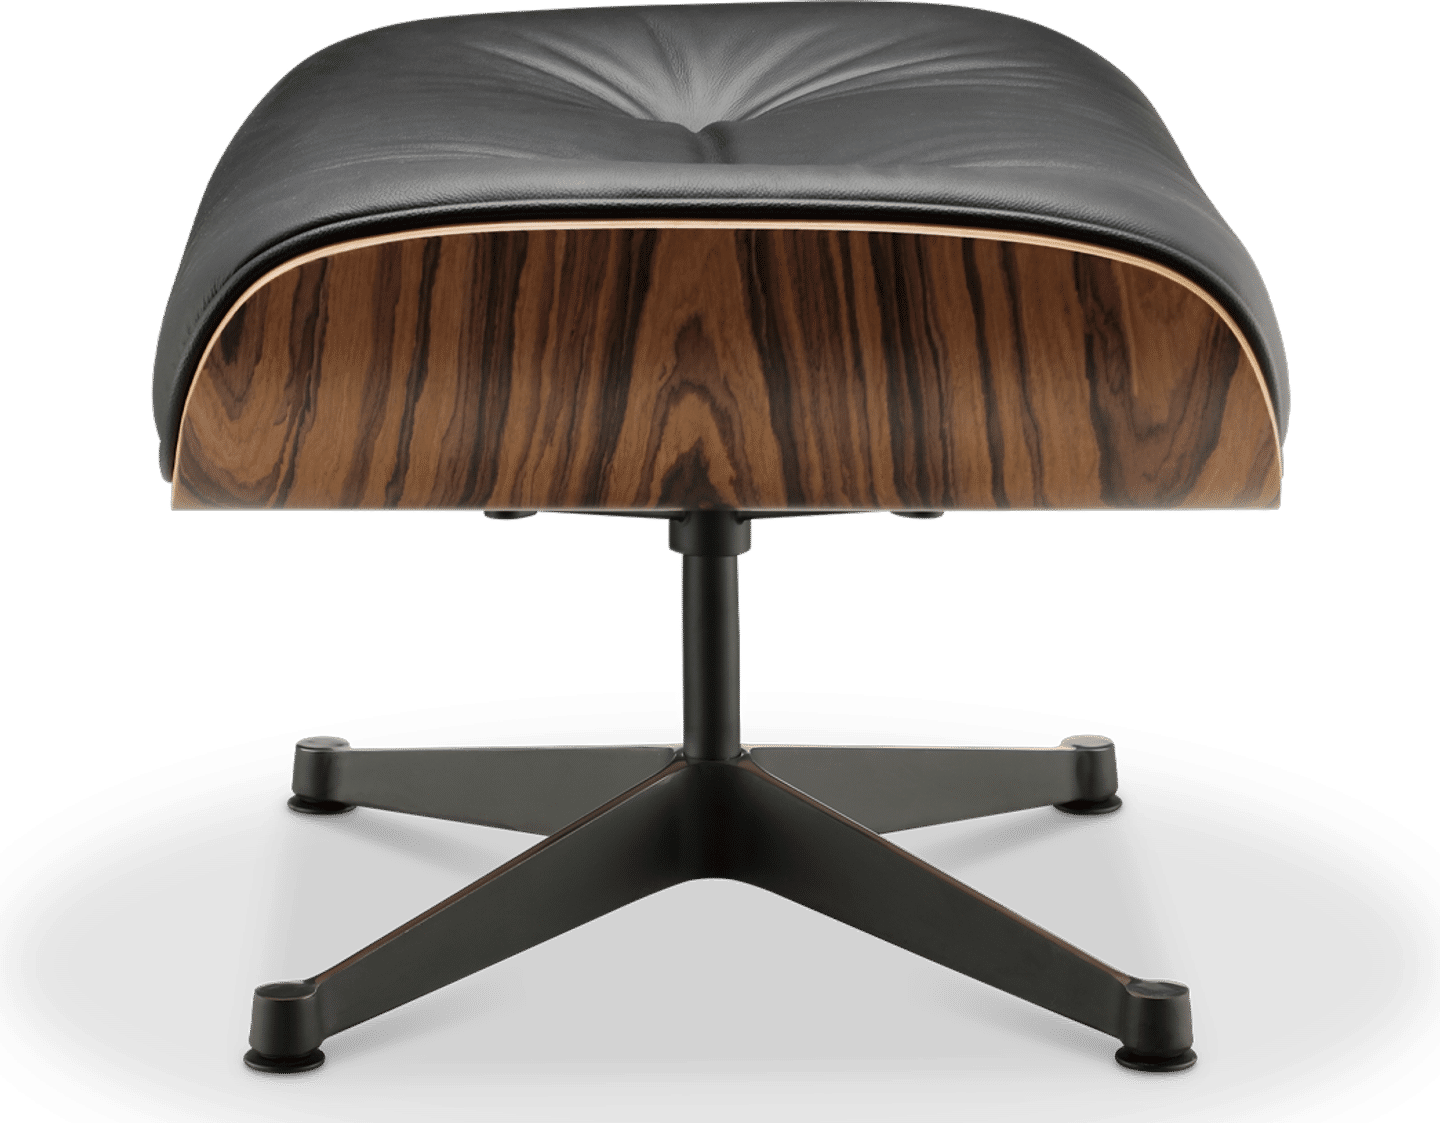 Eames Style Lounge Chair 670 Stool Italian Leather/Black/Rosewood image.